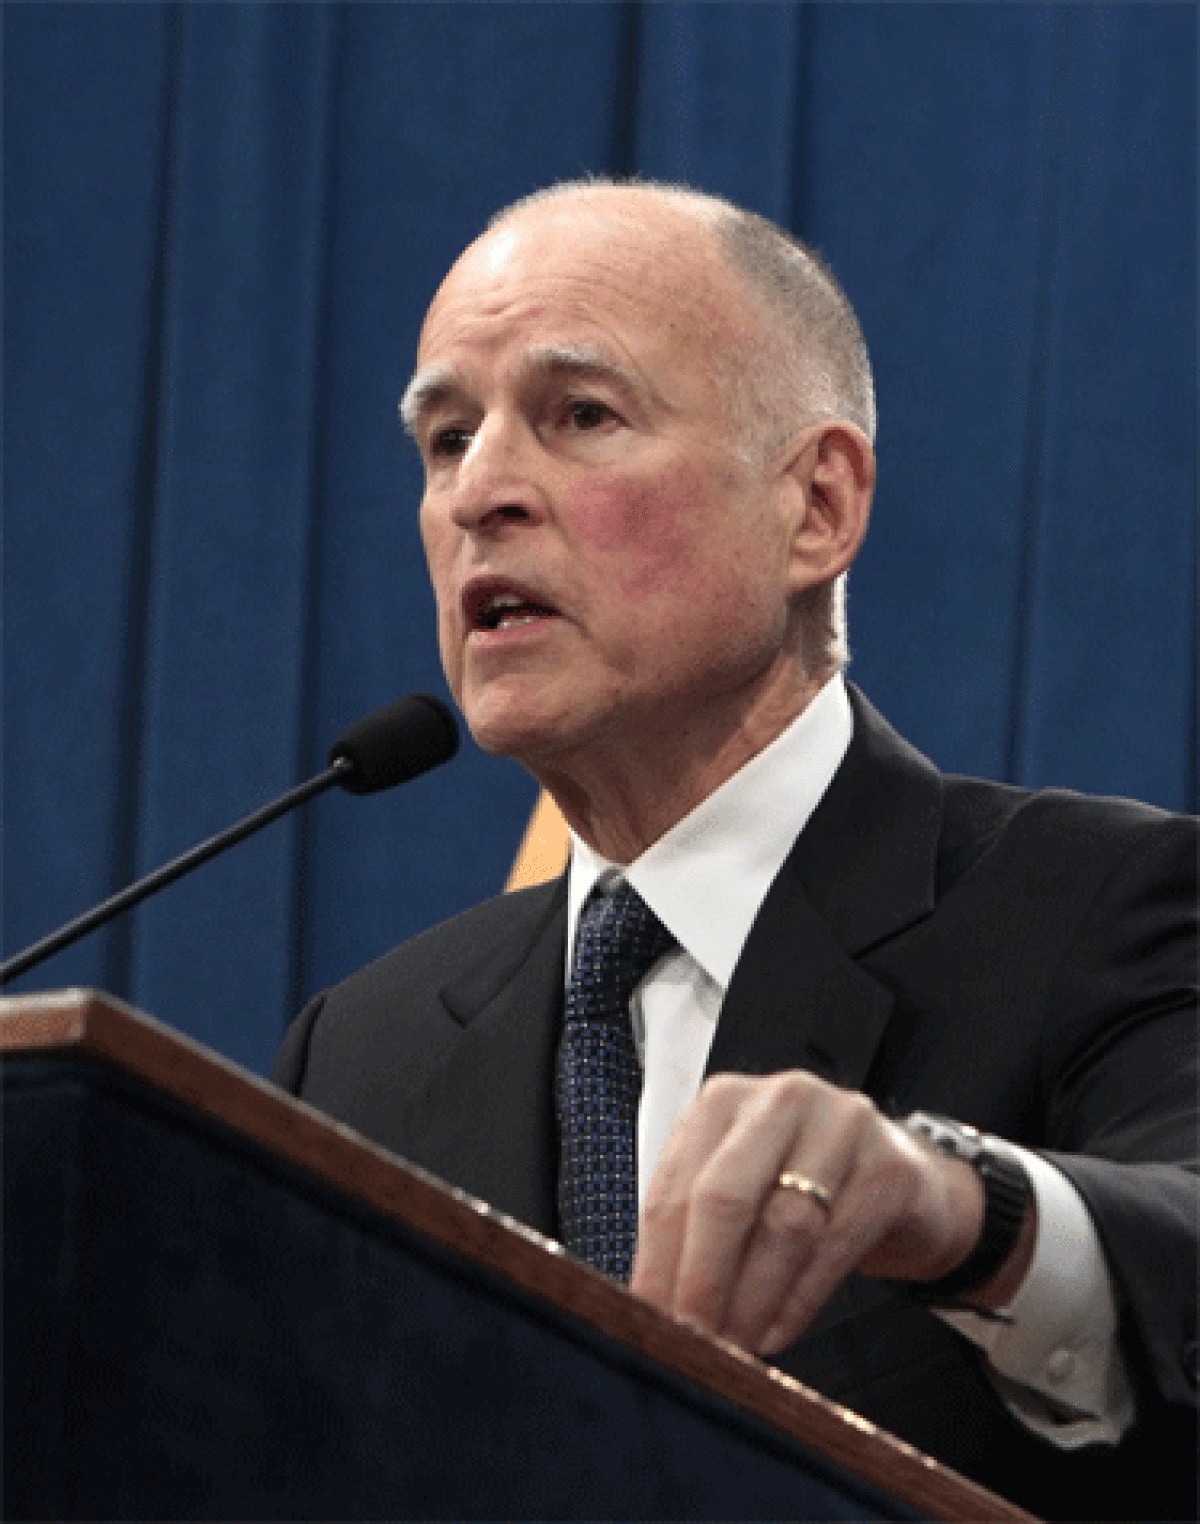 Gov. Jerry Brown gives his State of the State address Thursday. Above: Gov. Brown responds to questions concerning his proposed 2013-14 state budget he unveiled at the Capitol in Sacramento on Jan. 10.